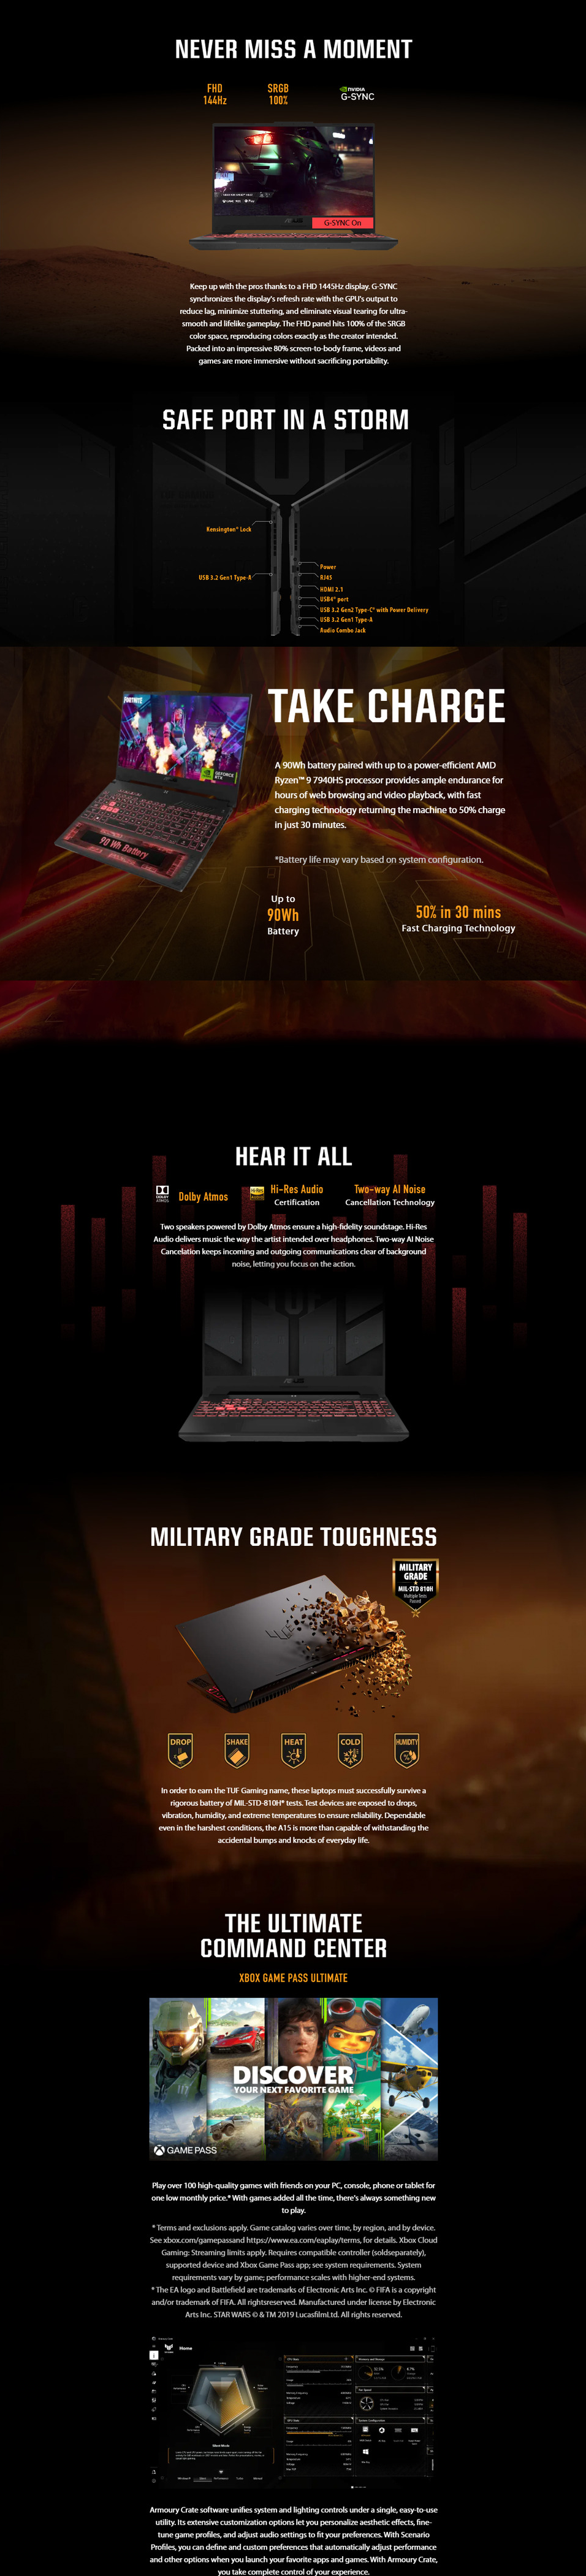 A large marketing image providing additional information about the product ASUS TUF Gaming A15 (FA507) - 15.6" Ryzen 5, RTX 4060, 16GB/1TB - Win 11 Notebook - Additional alt info not provided